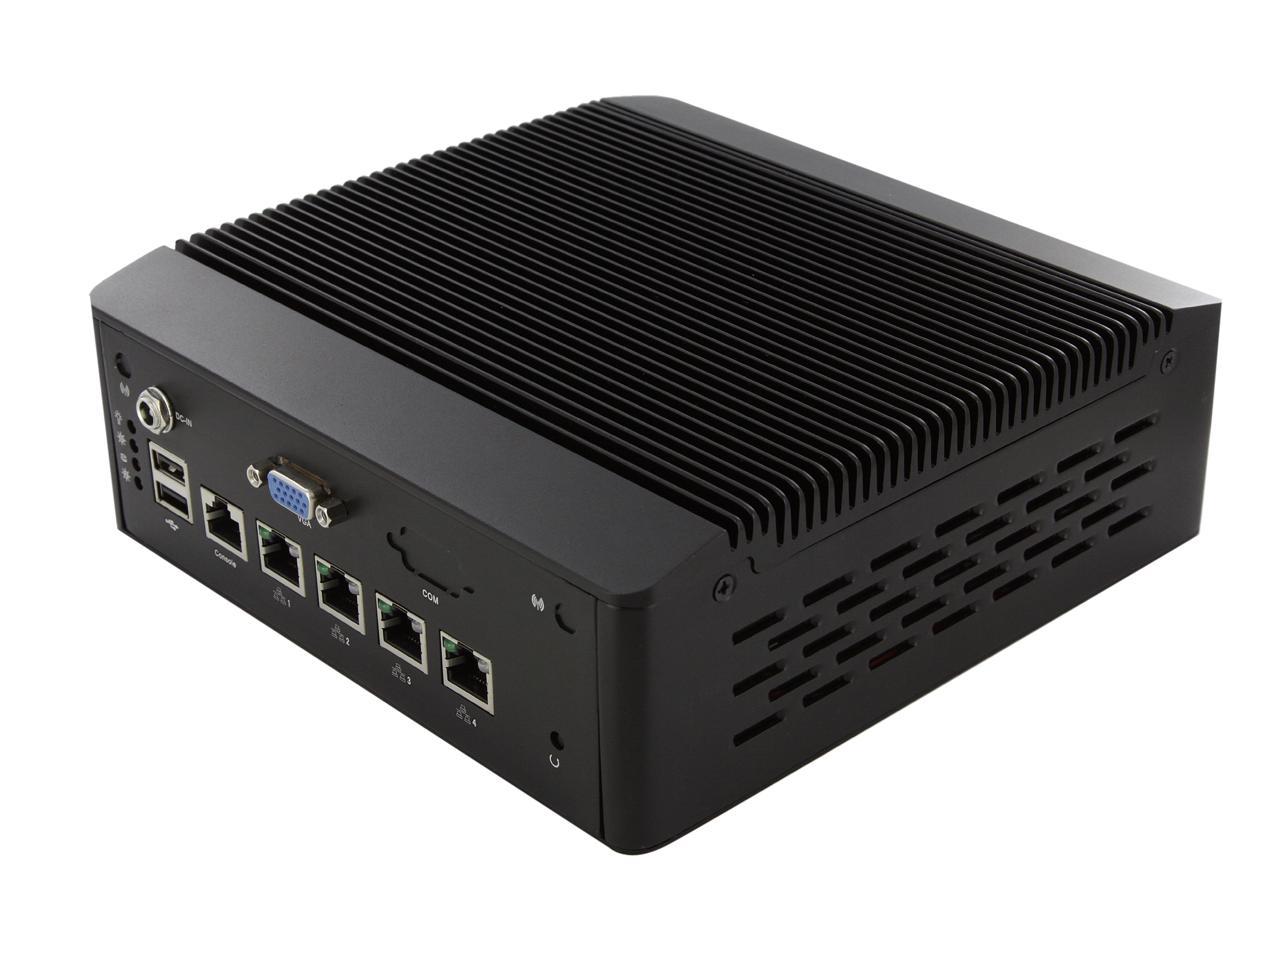 Small Form Factor Servers